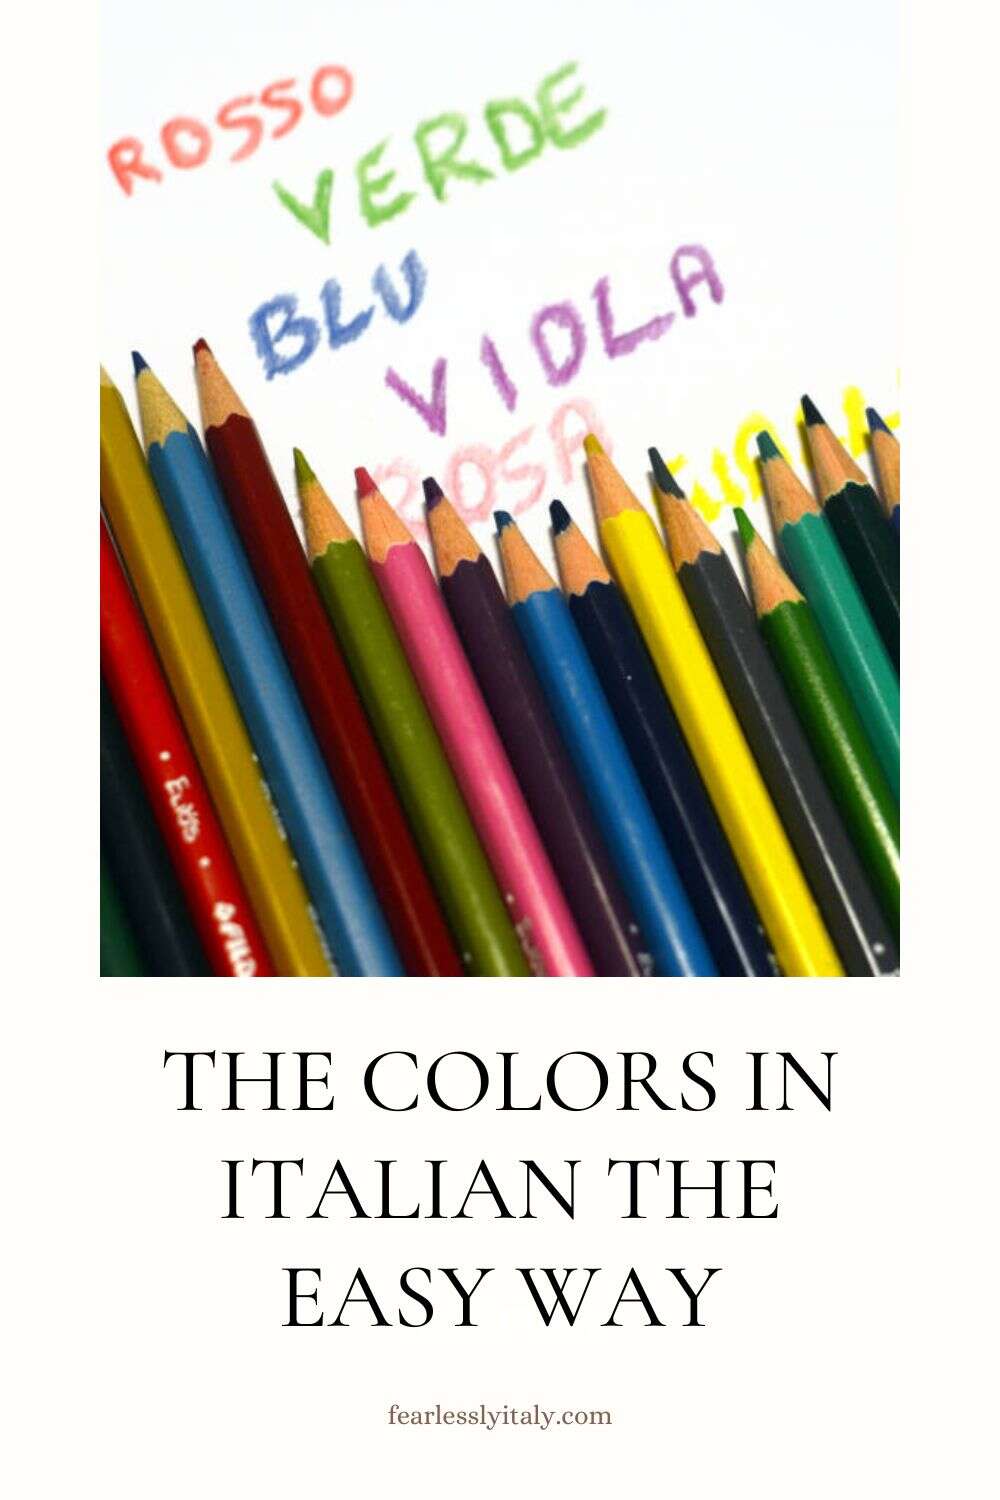 Pinterest image with a photo of colored pencils and colors written in Italian and a caption reading "The colors in Italian the easy way"